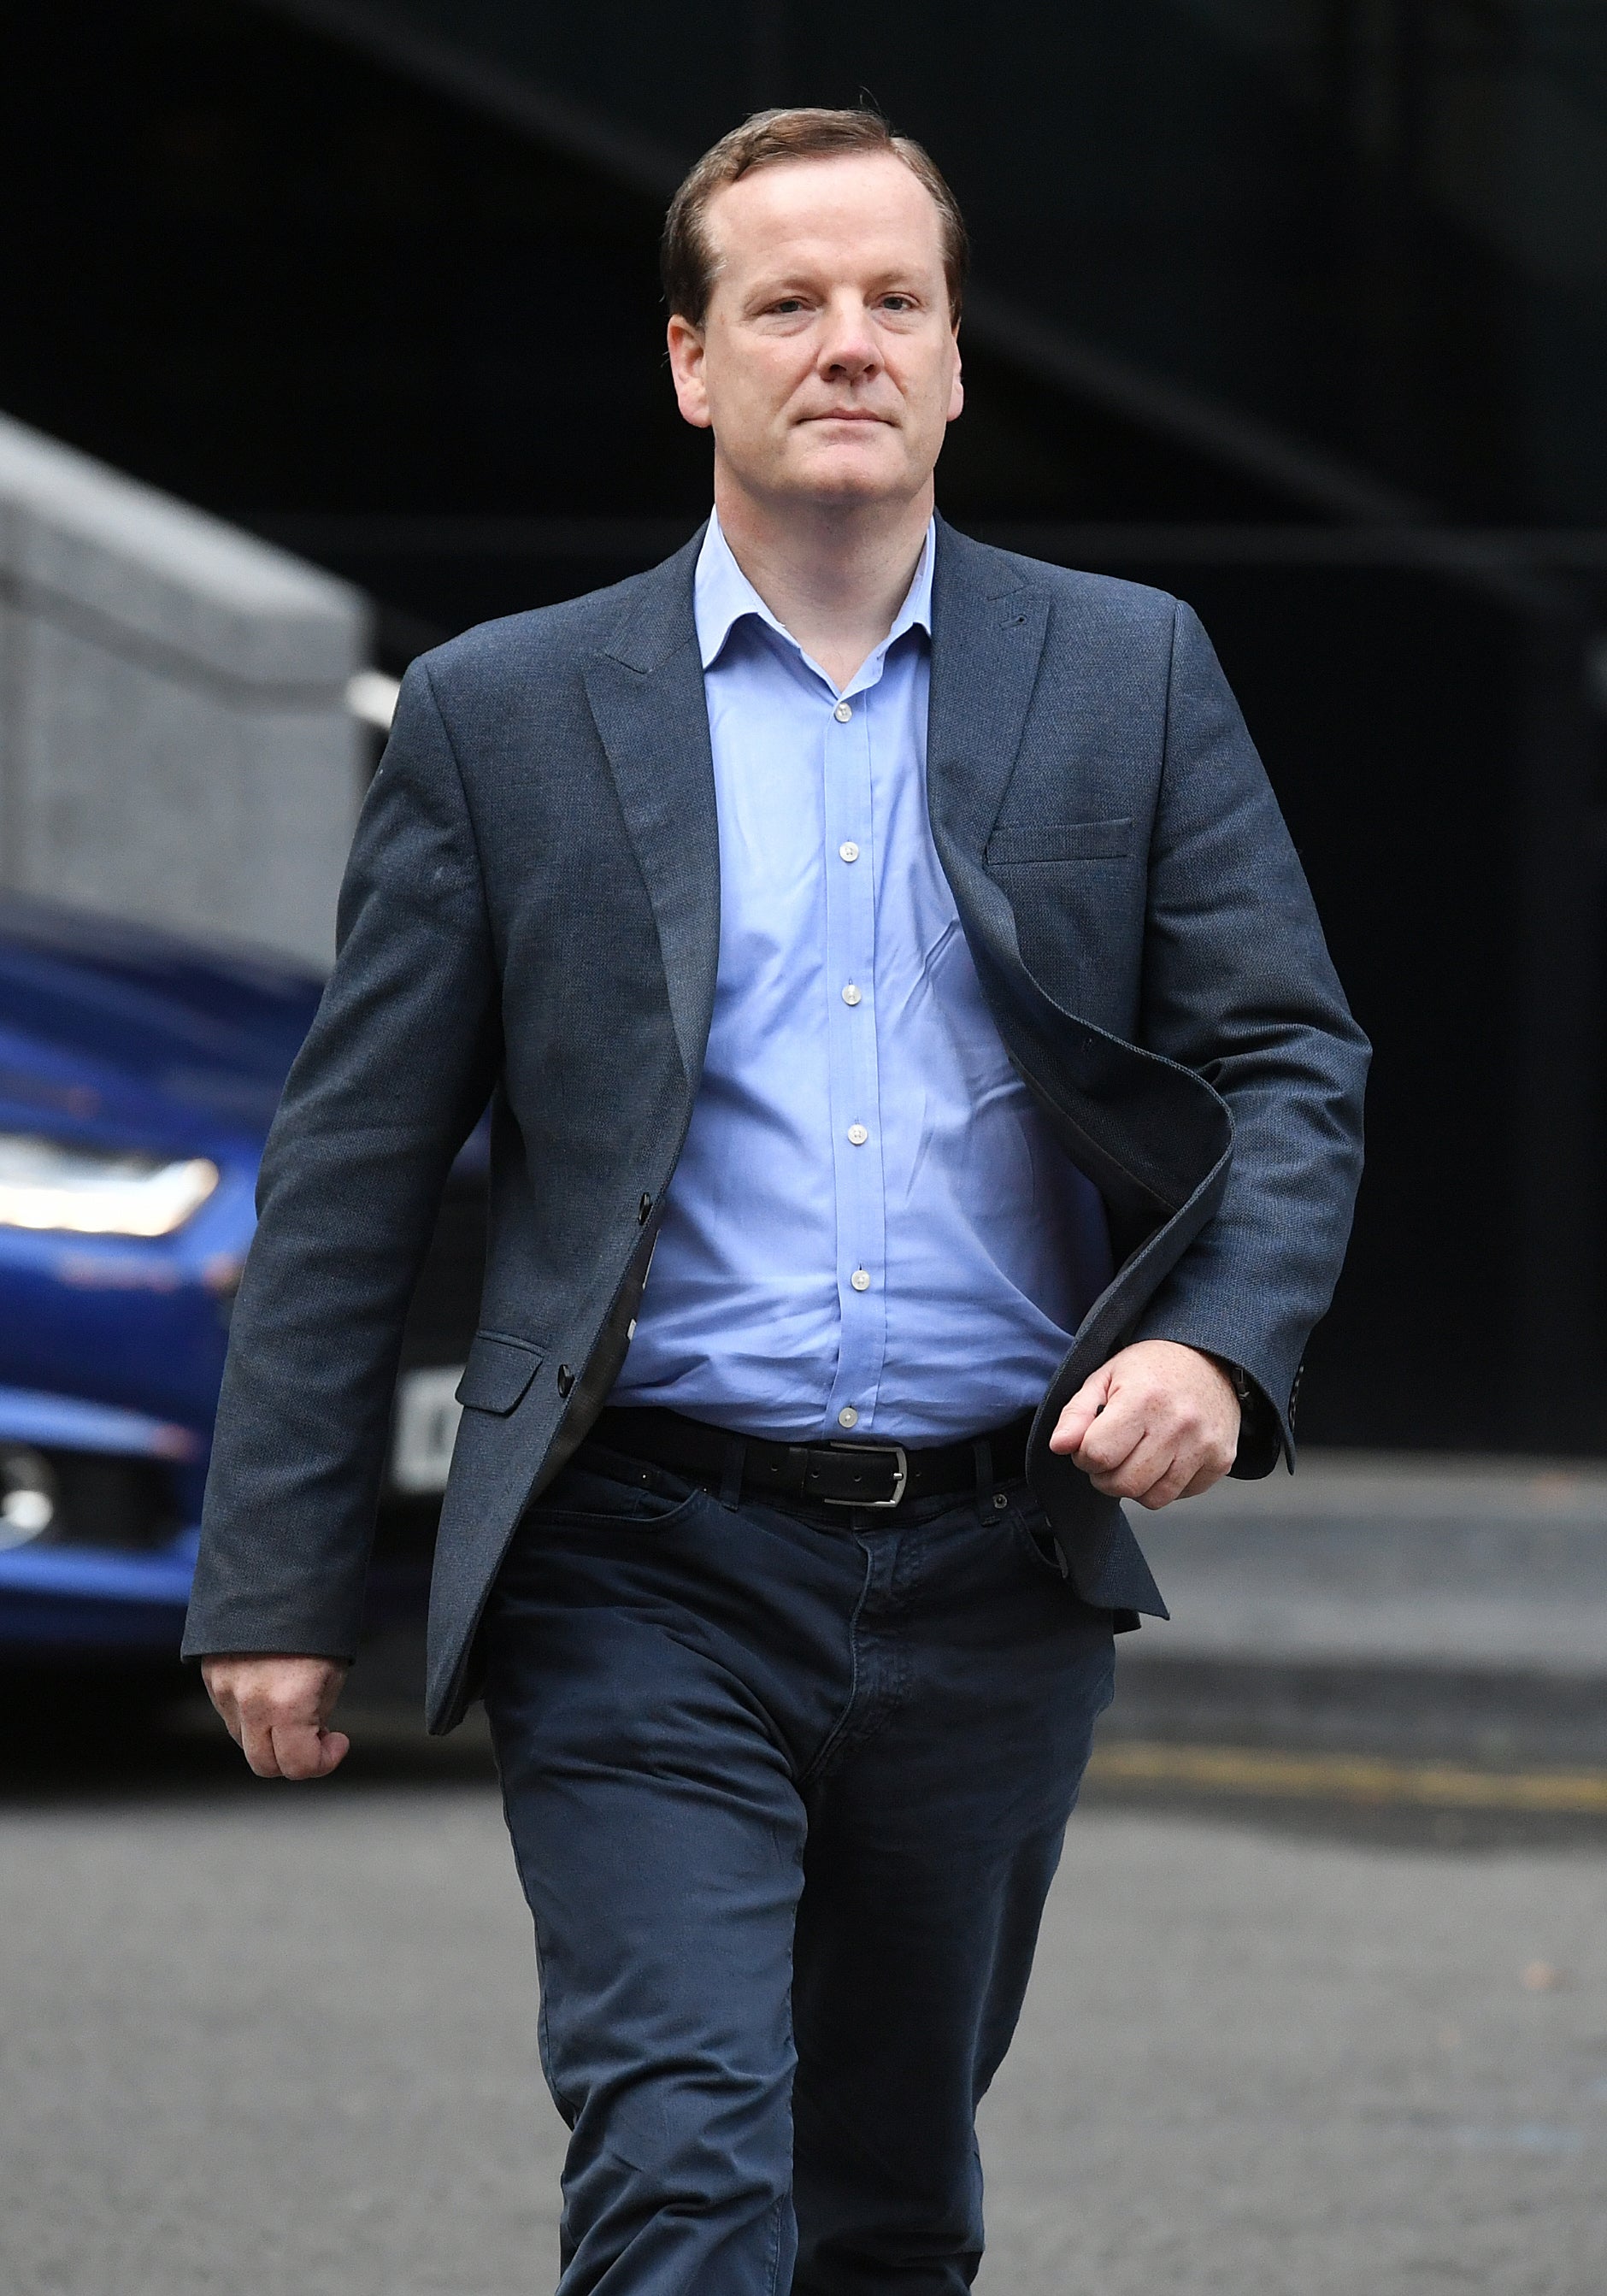 Former Conservative MP Charlie Elphicke still owes court costs after his conviction (Kirsty O’Connor/PA)